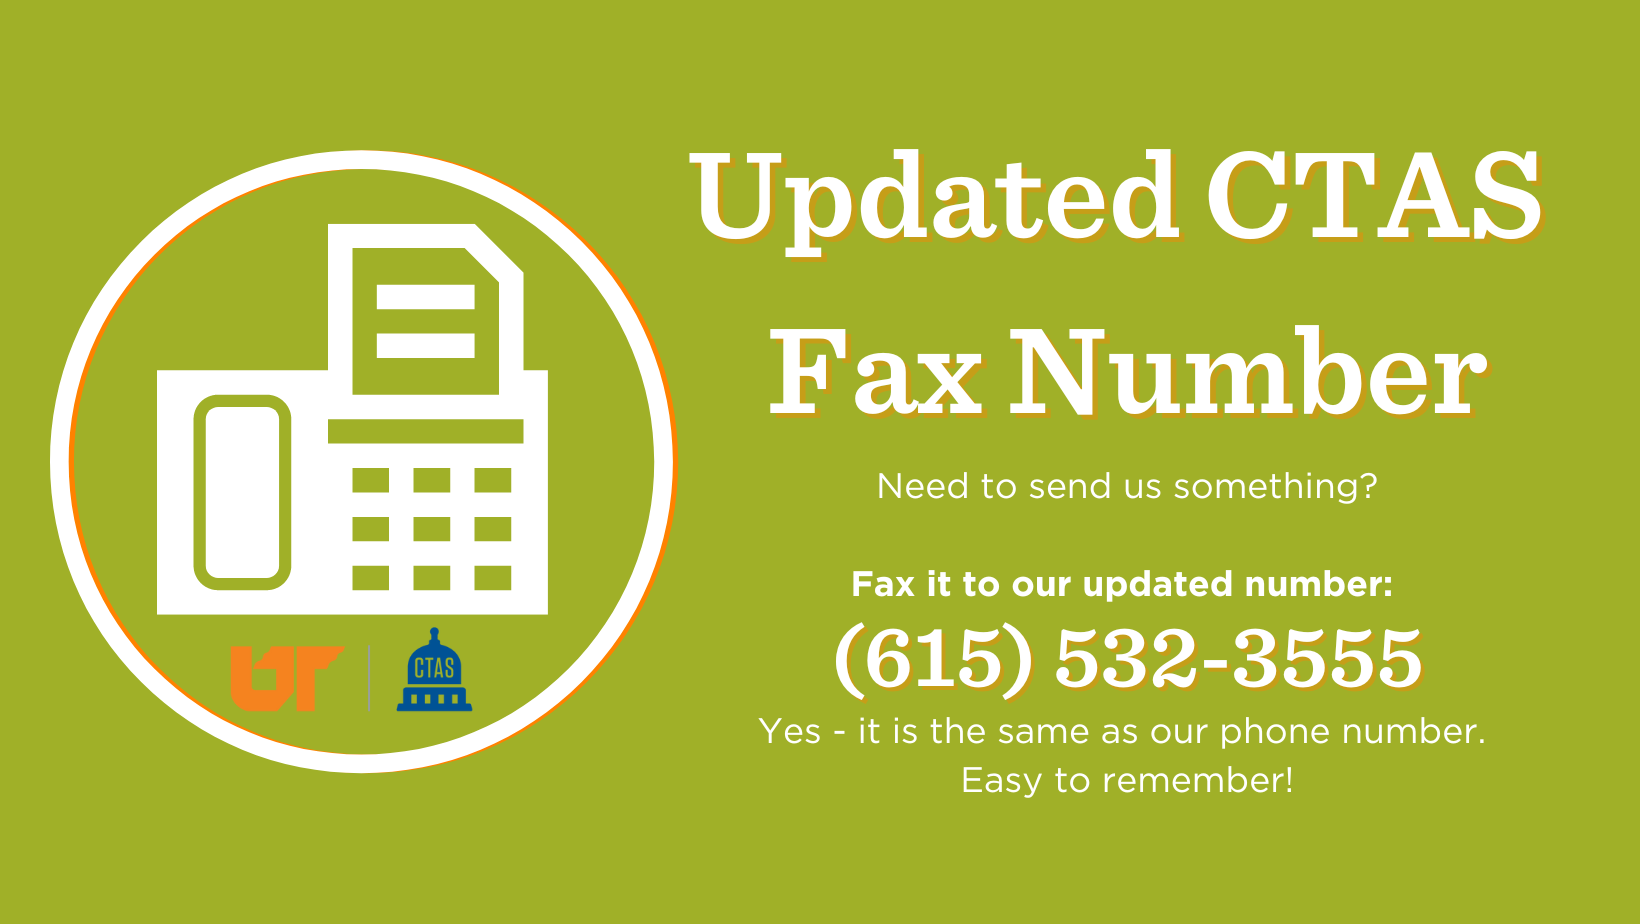 image of fax machine and text about updated fax number